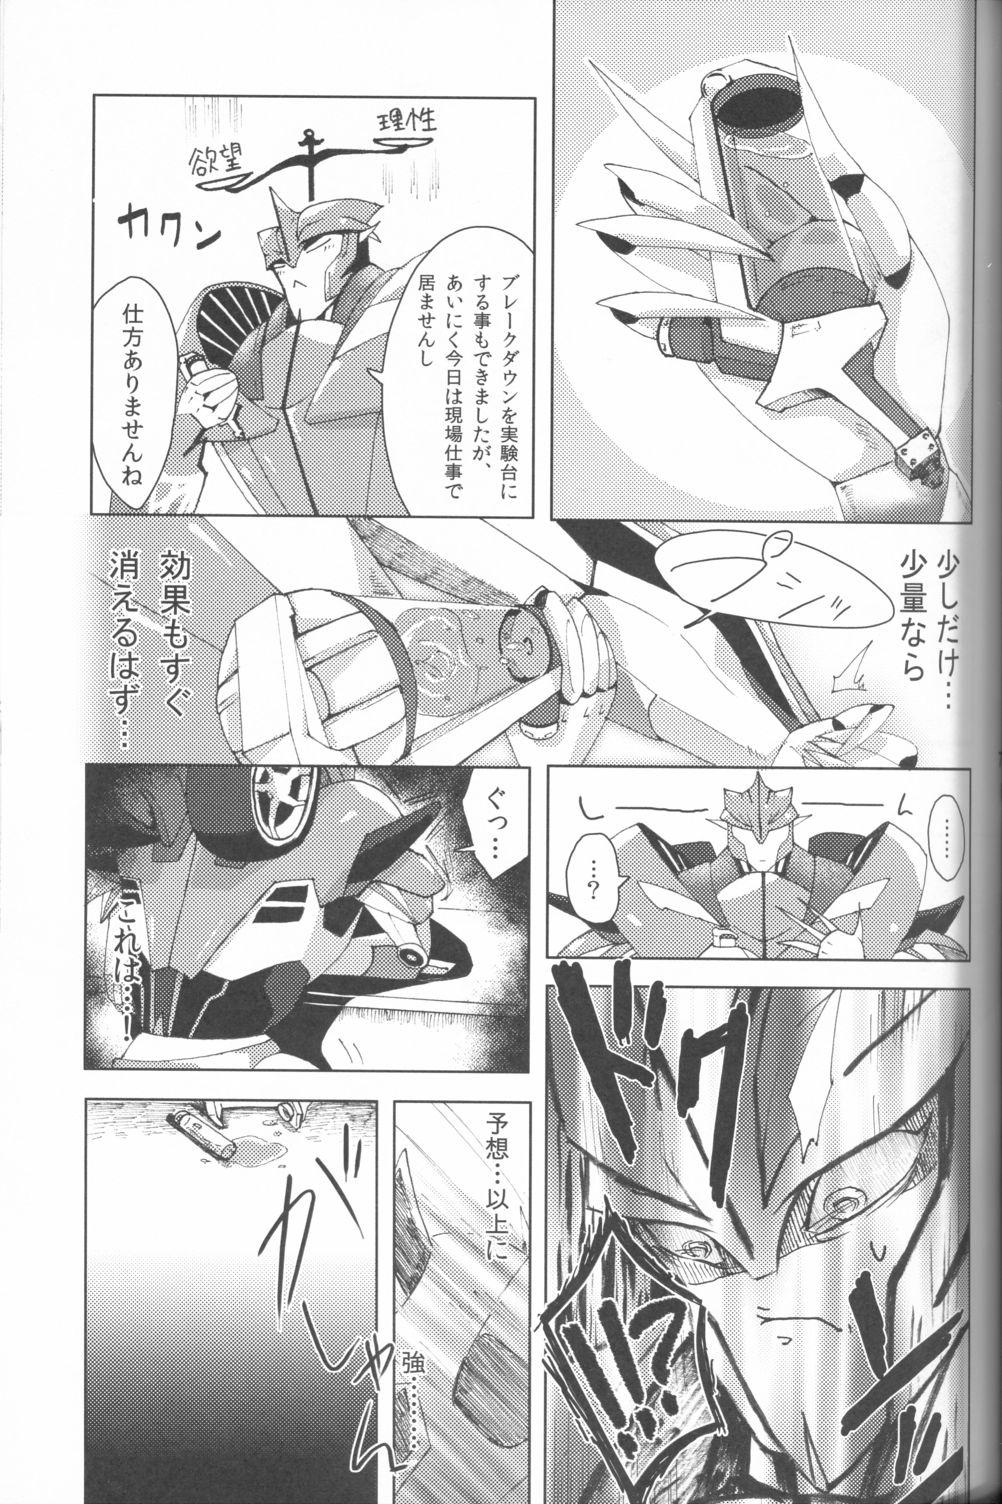 Boobs Knock x Knock - Transformers Full - Page 6